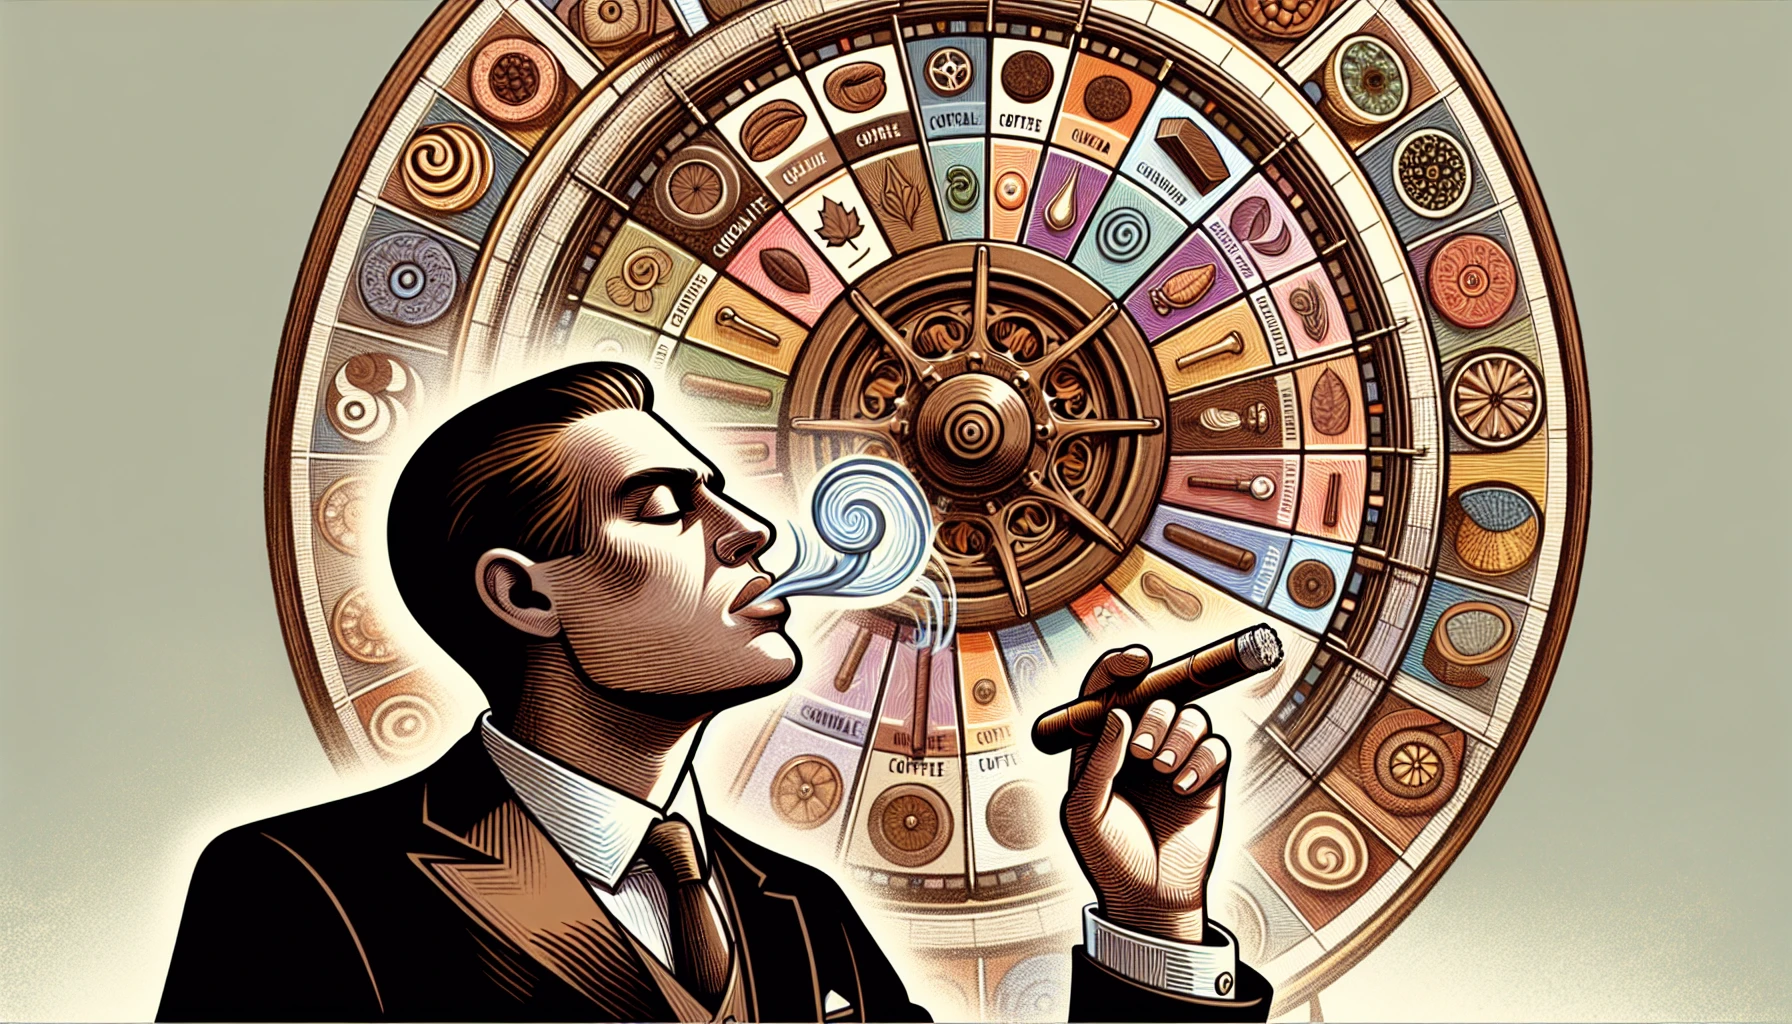 Matching a cigar's flavor profile to personal preferences, illustrated by a person holding a cigar with a flavor wheel in the background